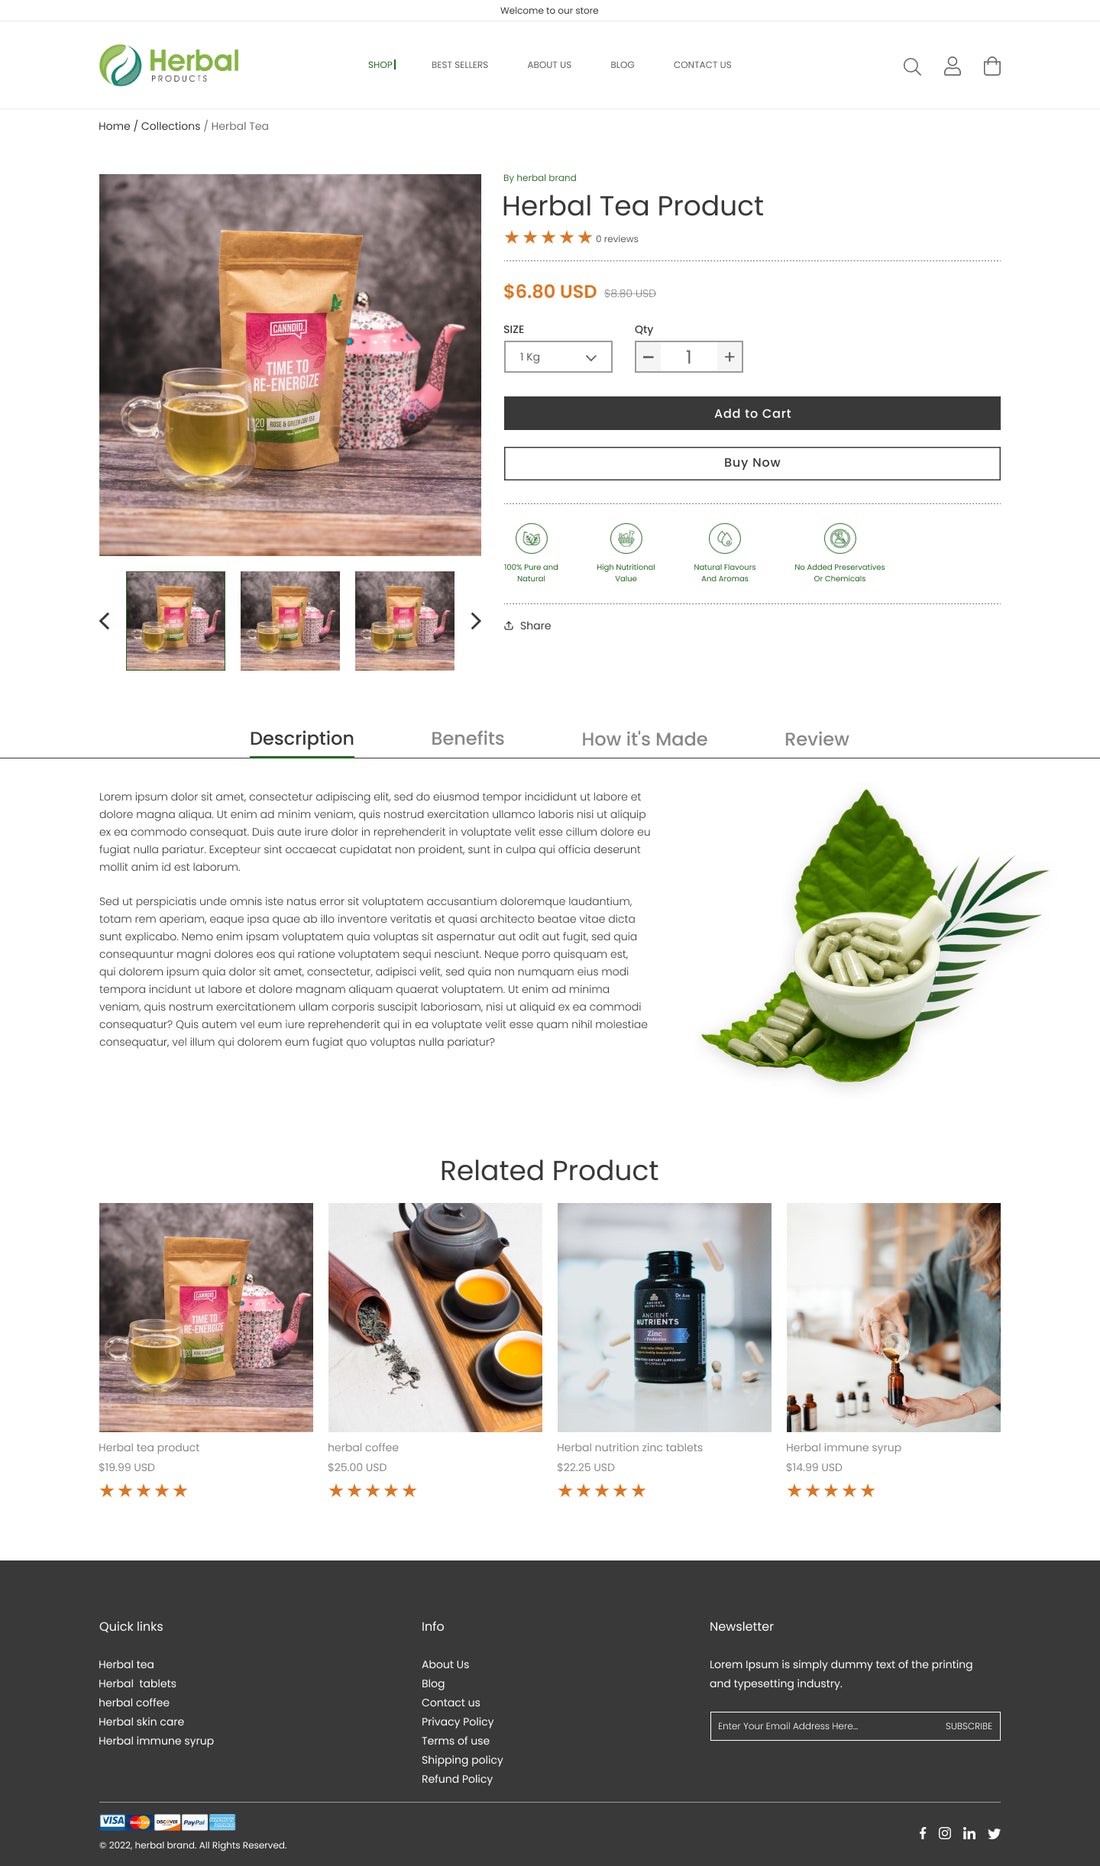 D-Herbal Product Detail Page